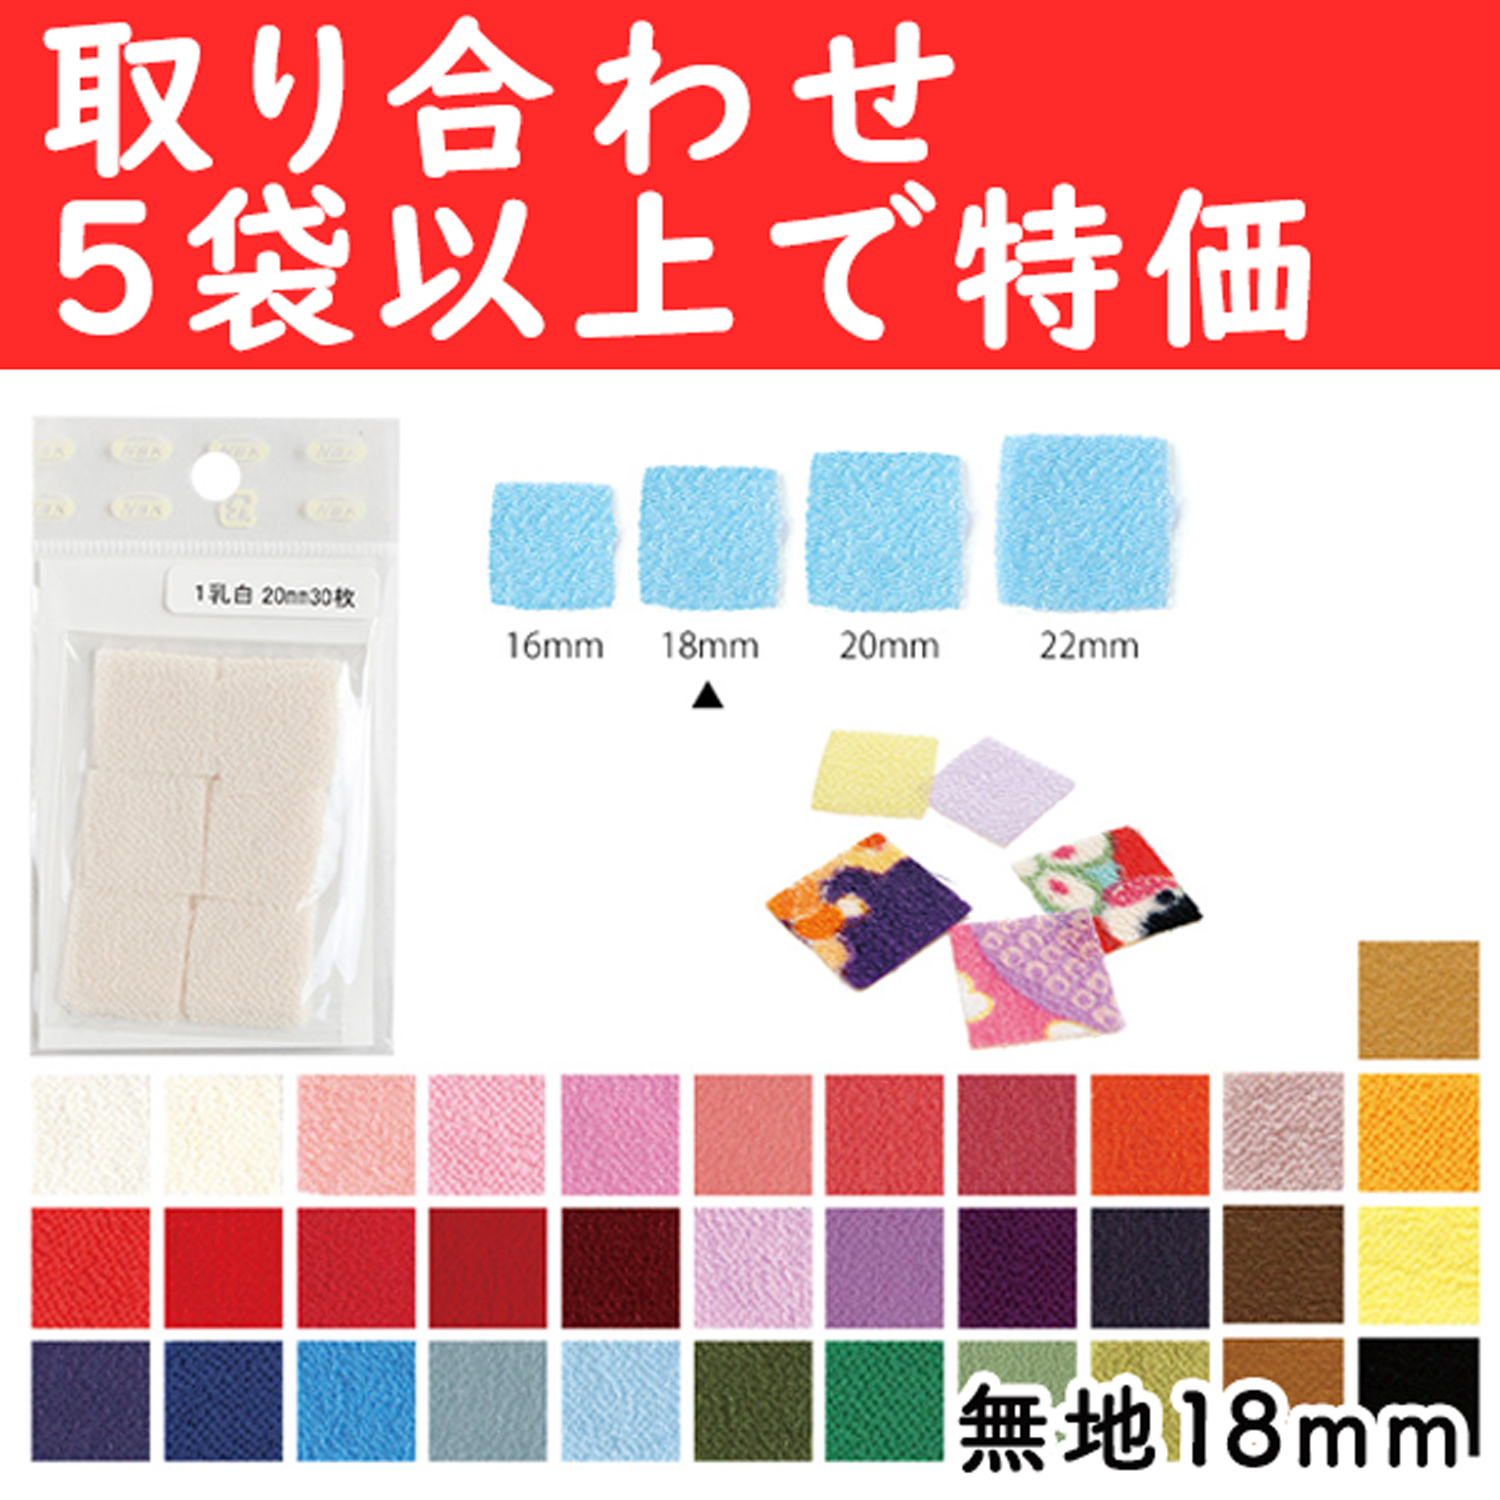 S50CH18-OVER5 Tsumami Crafting Crepe 18mm 30pcs over 5 pack more (pack)